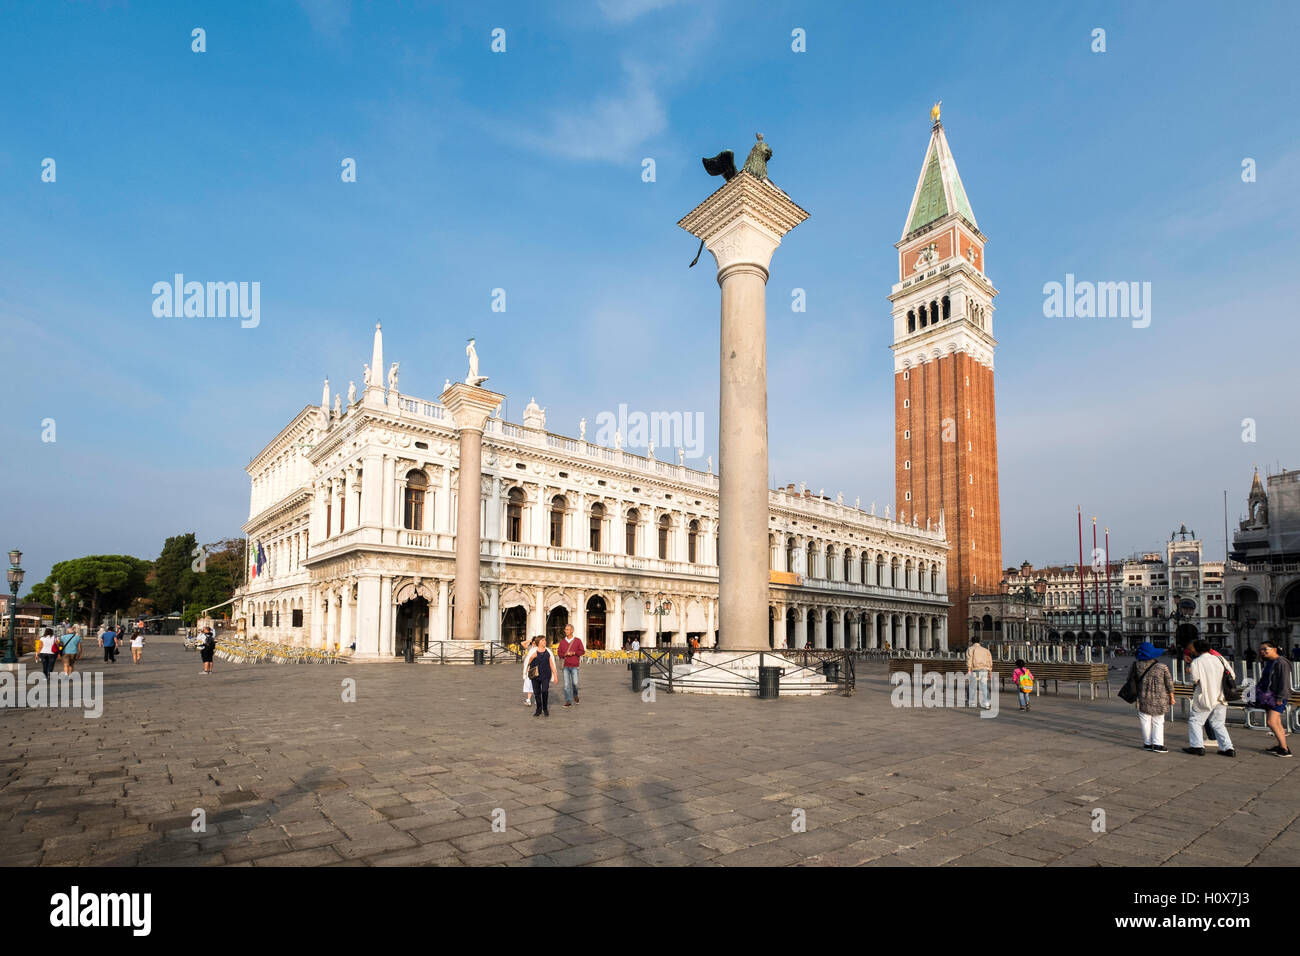 St Mark's Square, Piazza San Marco, Venice, early in morning with campanile and columns of San Marco & San Teodoro. Italy Stock Photo